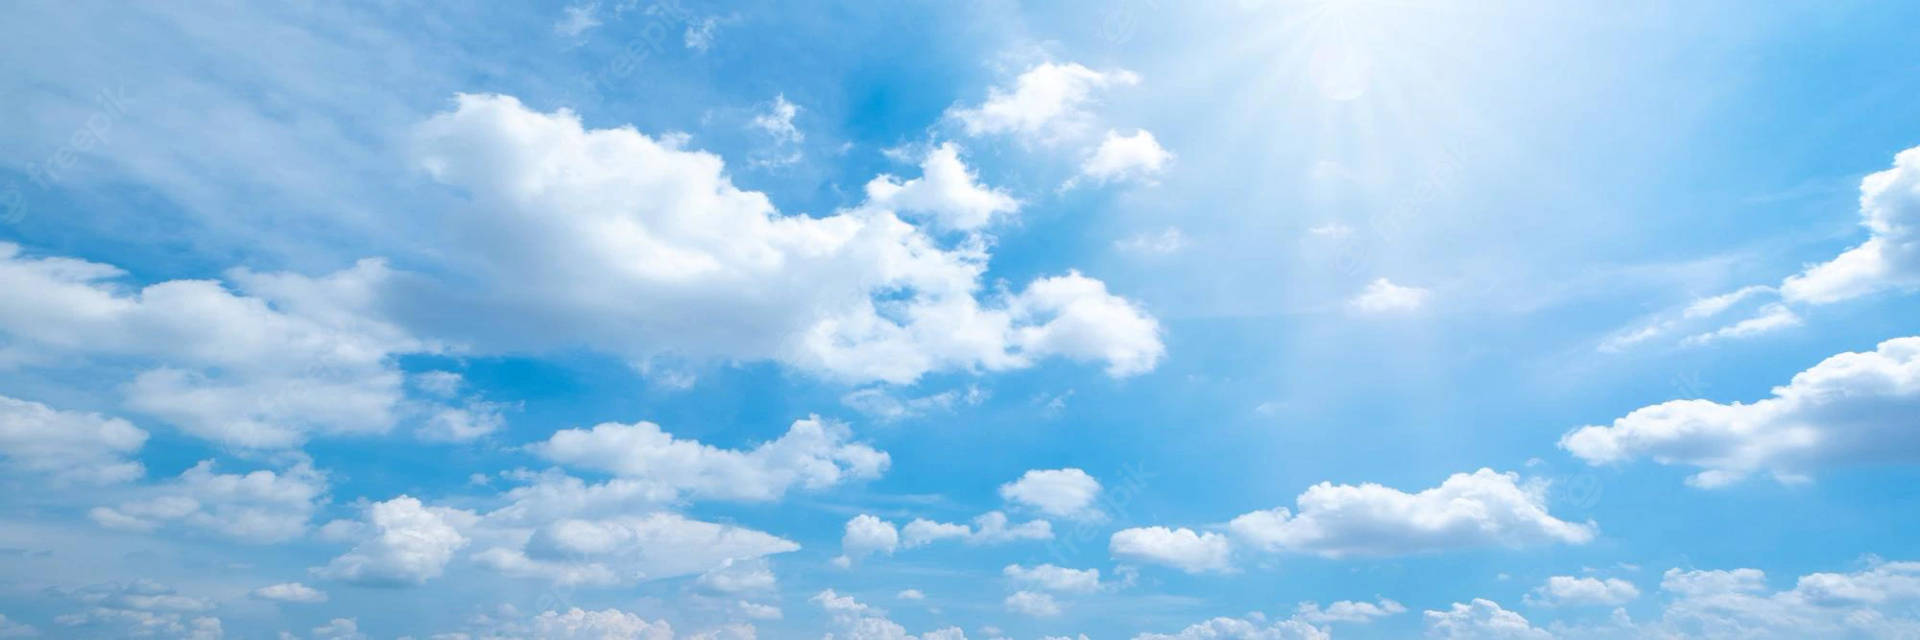 Funeral Clouds With Light Blue Skies Background